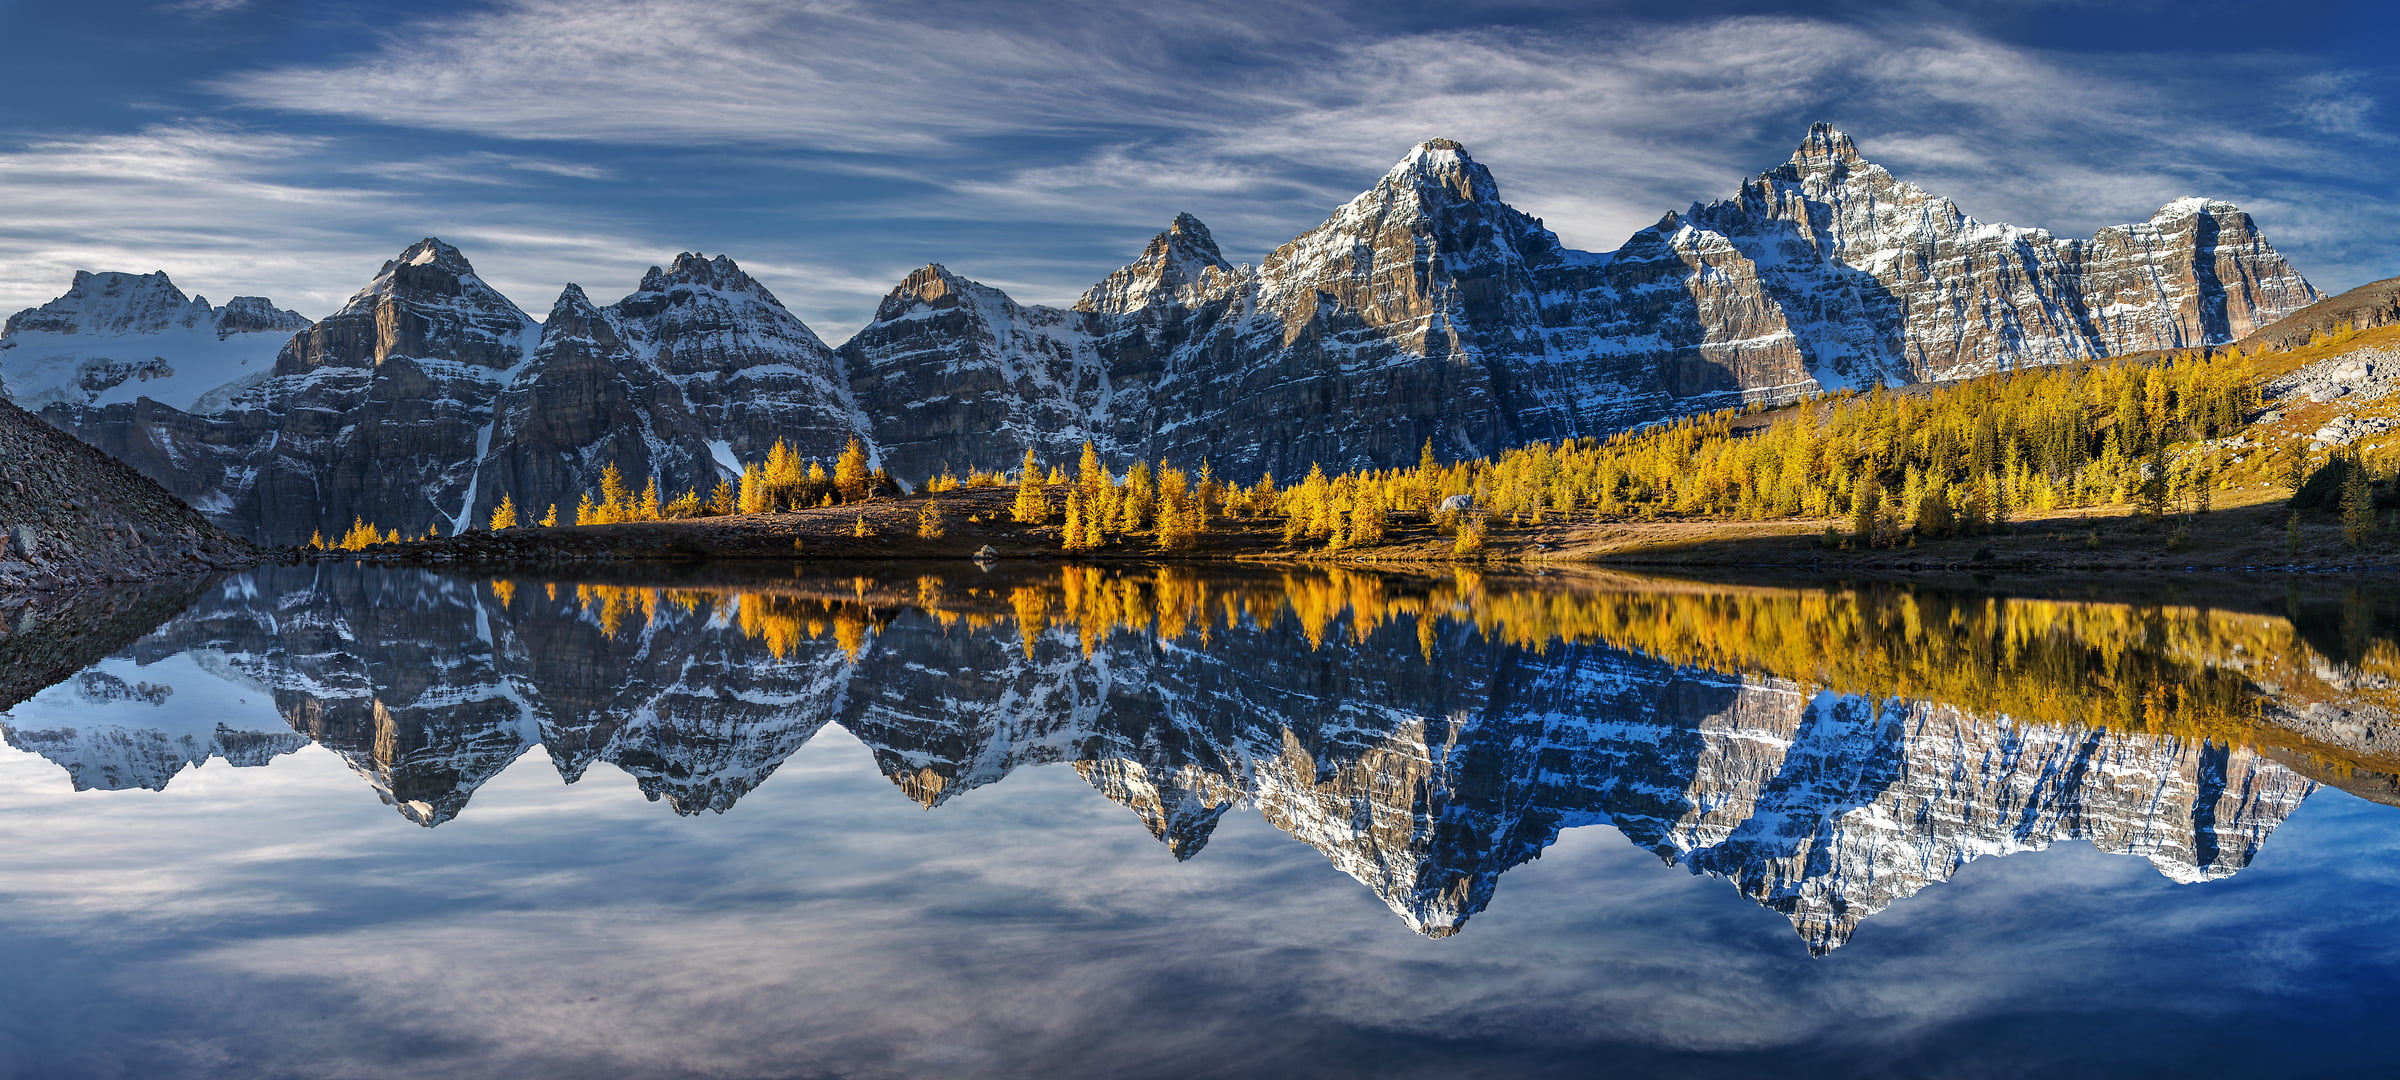 453 megapixels! A very high resolution, large-format VAST photo print of mountains, autumn trees, and a lake with reflection; fine art landscape photo created by Chris Collacott in Banff National Park, Alberta, Canada